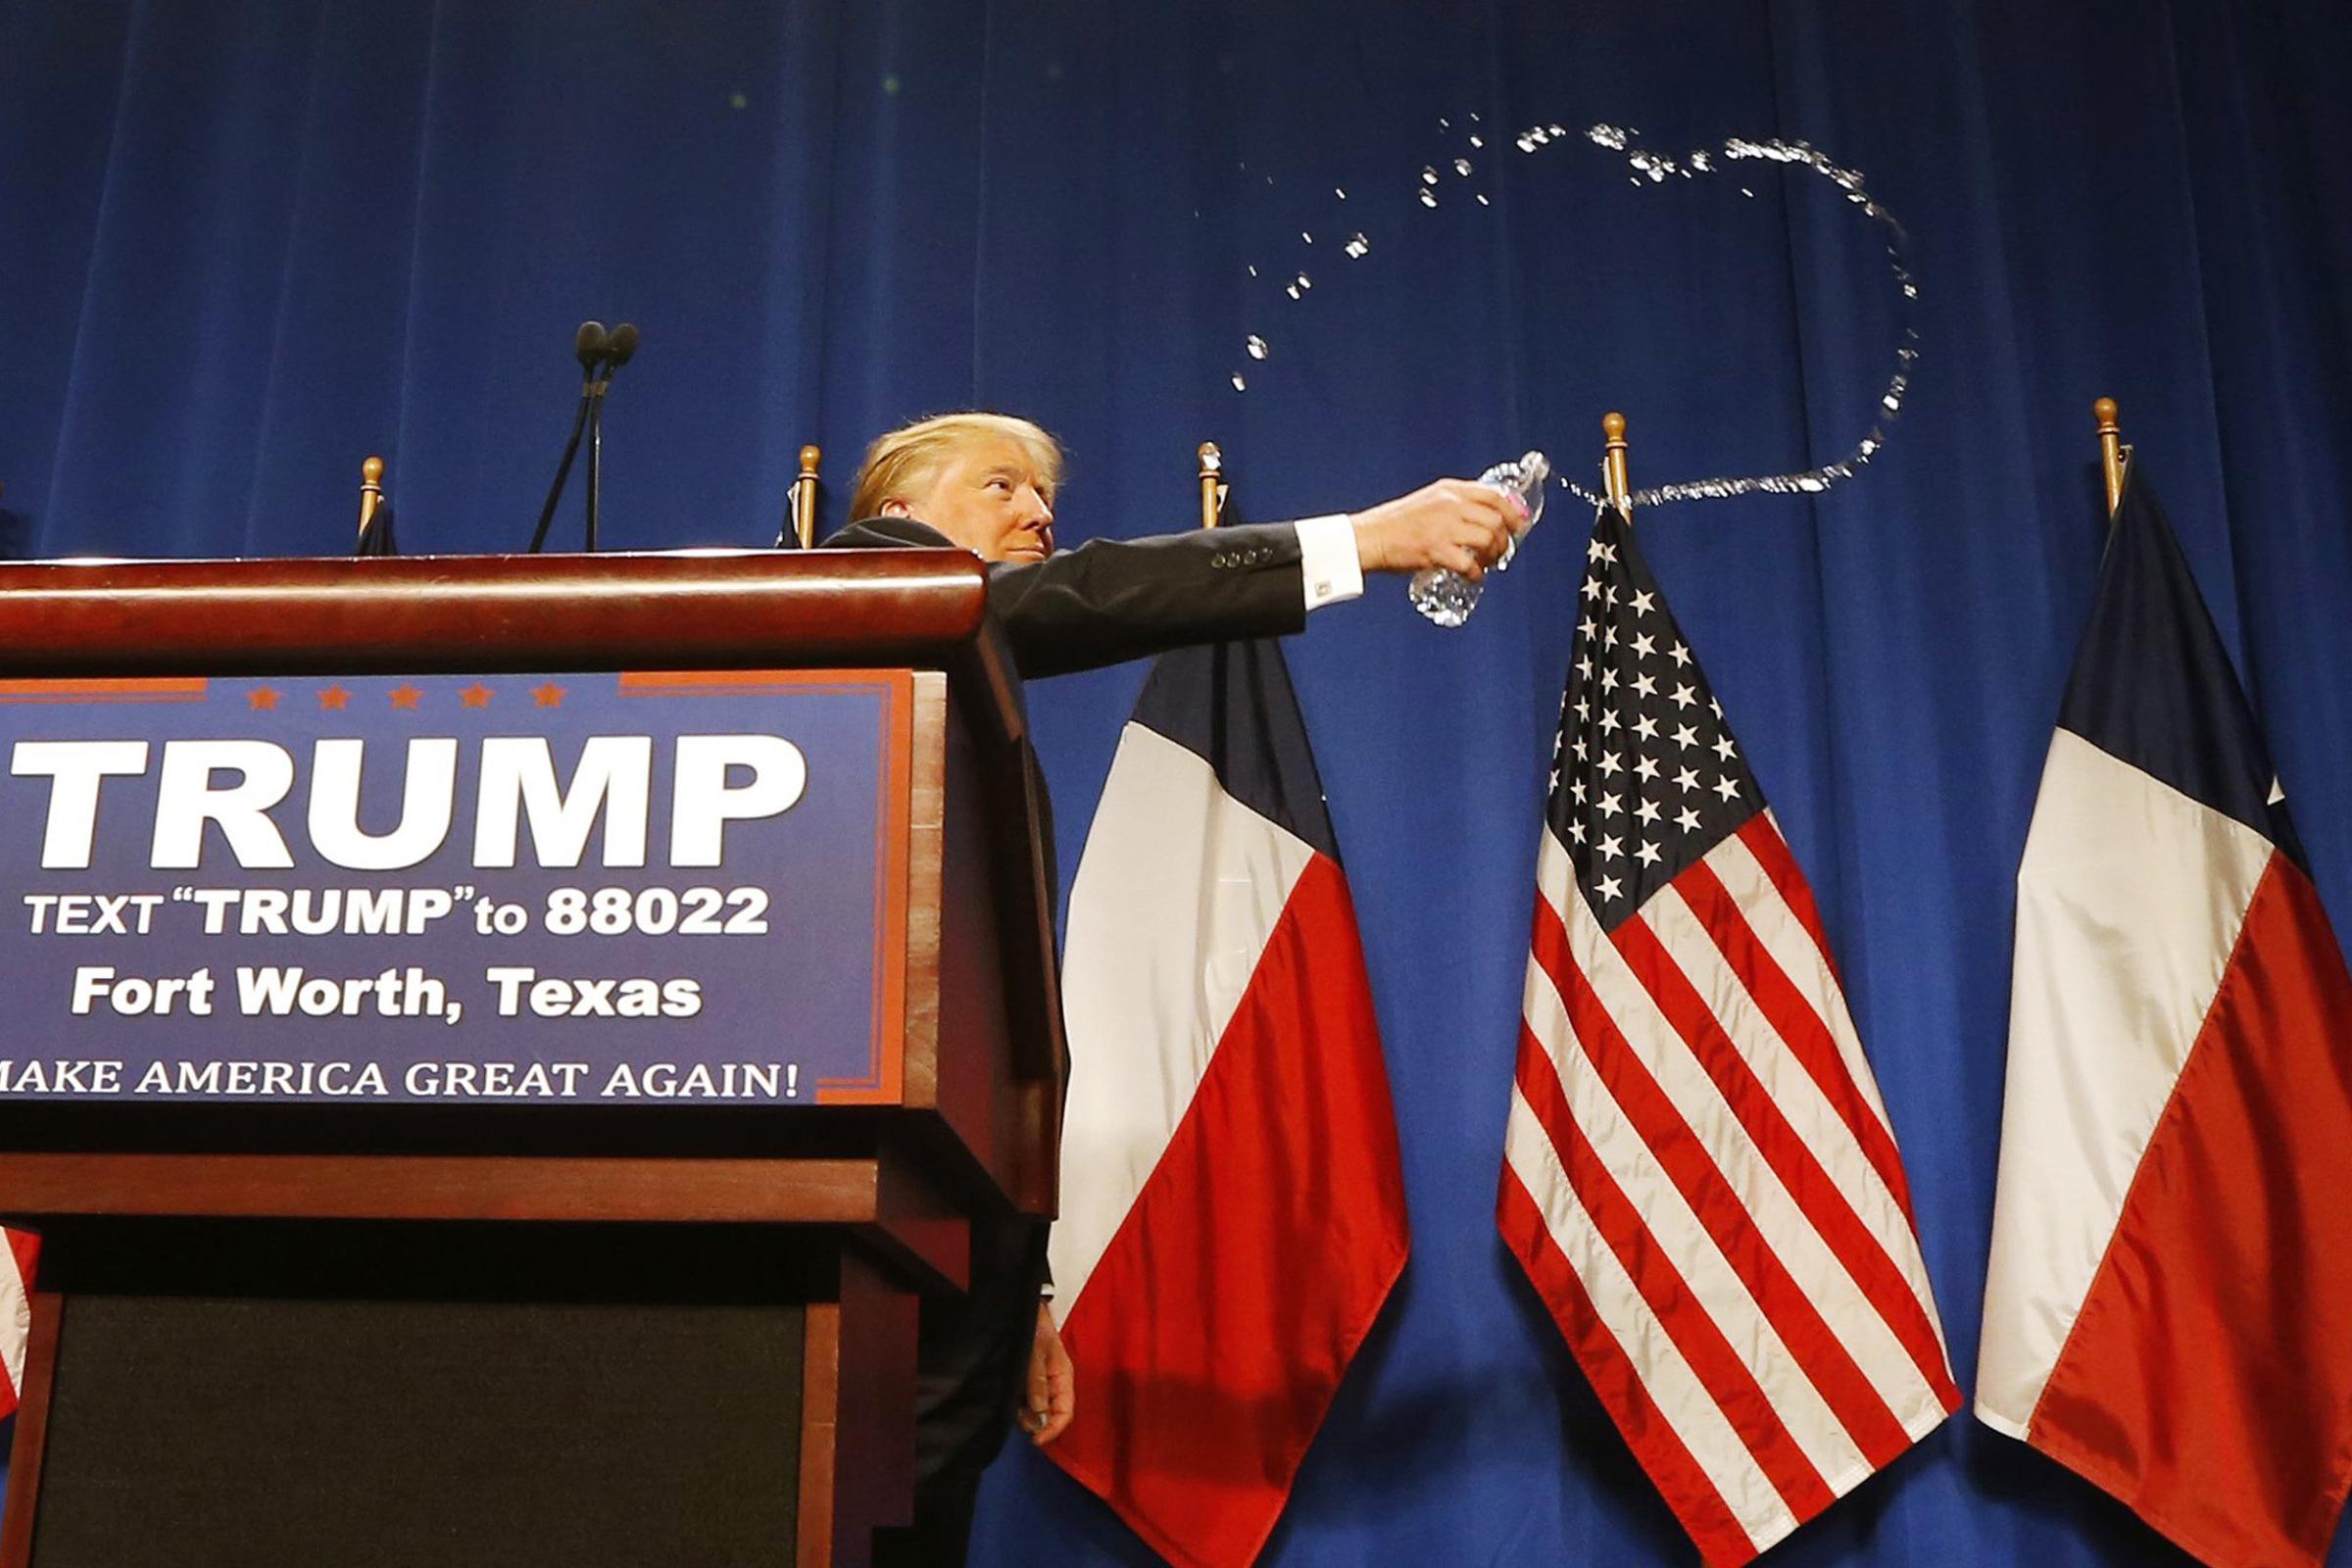 Republican presidential candidate Donald Trump slings water from a bottle during a rally in Fort Worth, Texas on Feb. 26.